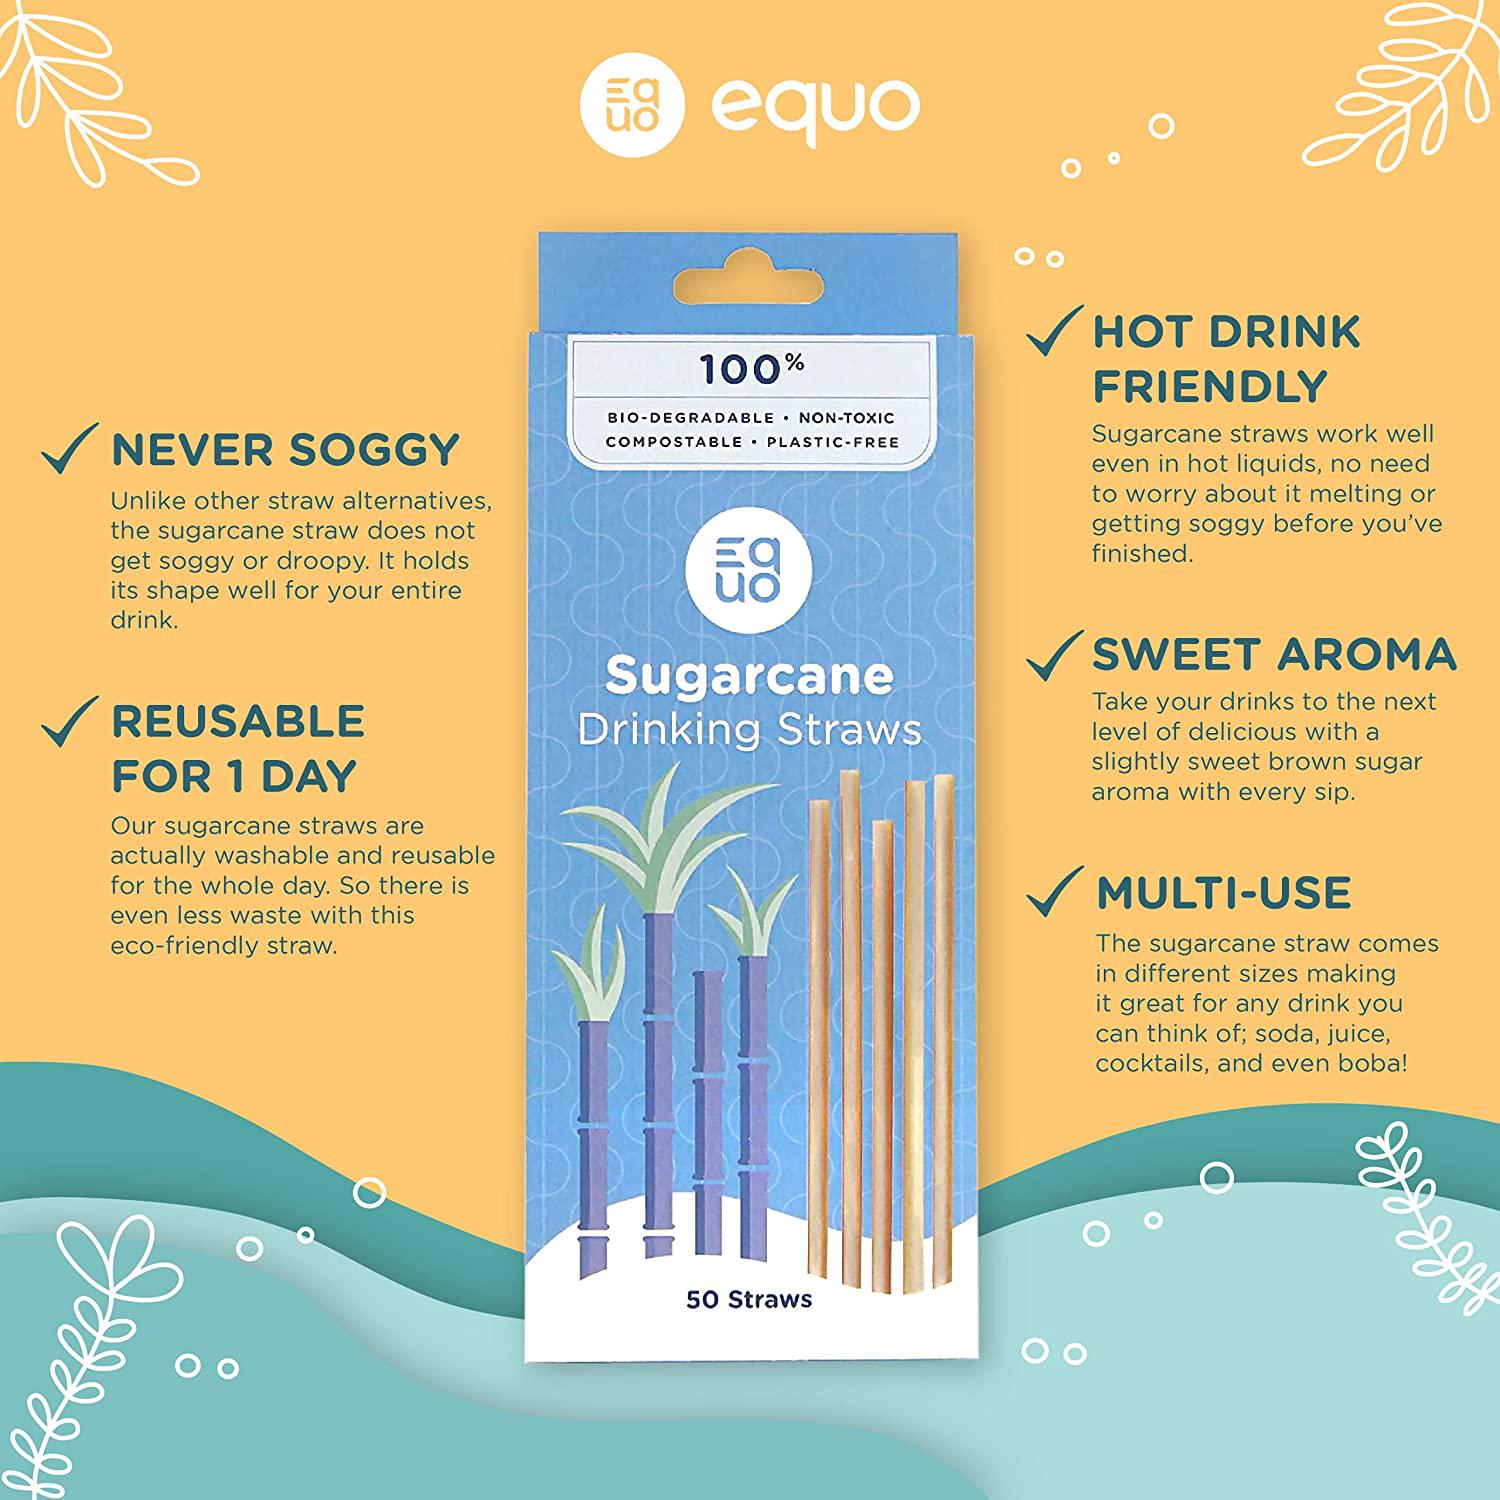 Equo, EQUO Sugarcane Straws, Disposable, Biodegradable, Compostable, and Plastic-Free Drinking Straws, Pack of 50, Standard